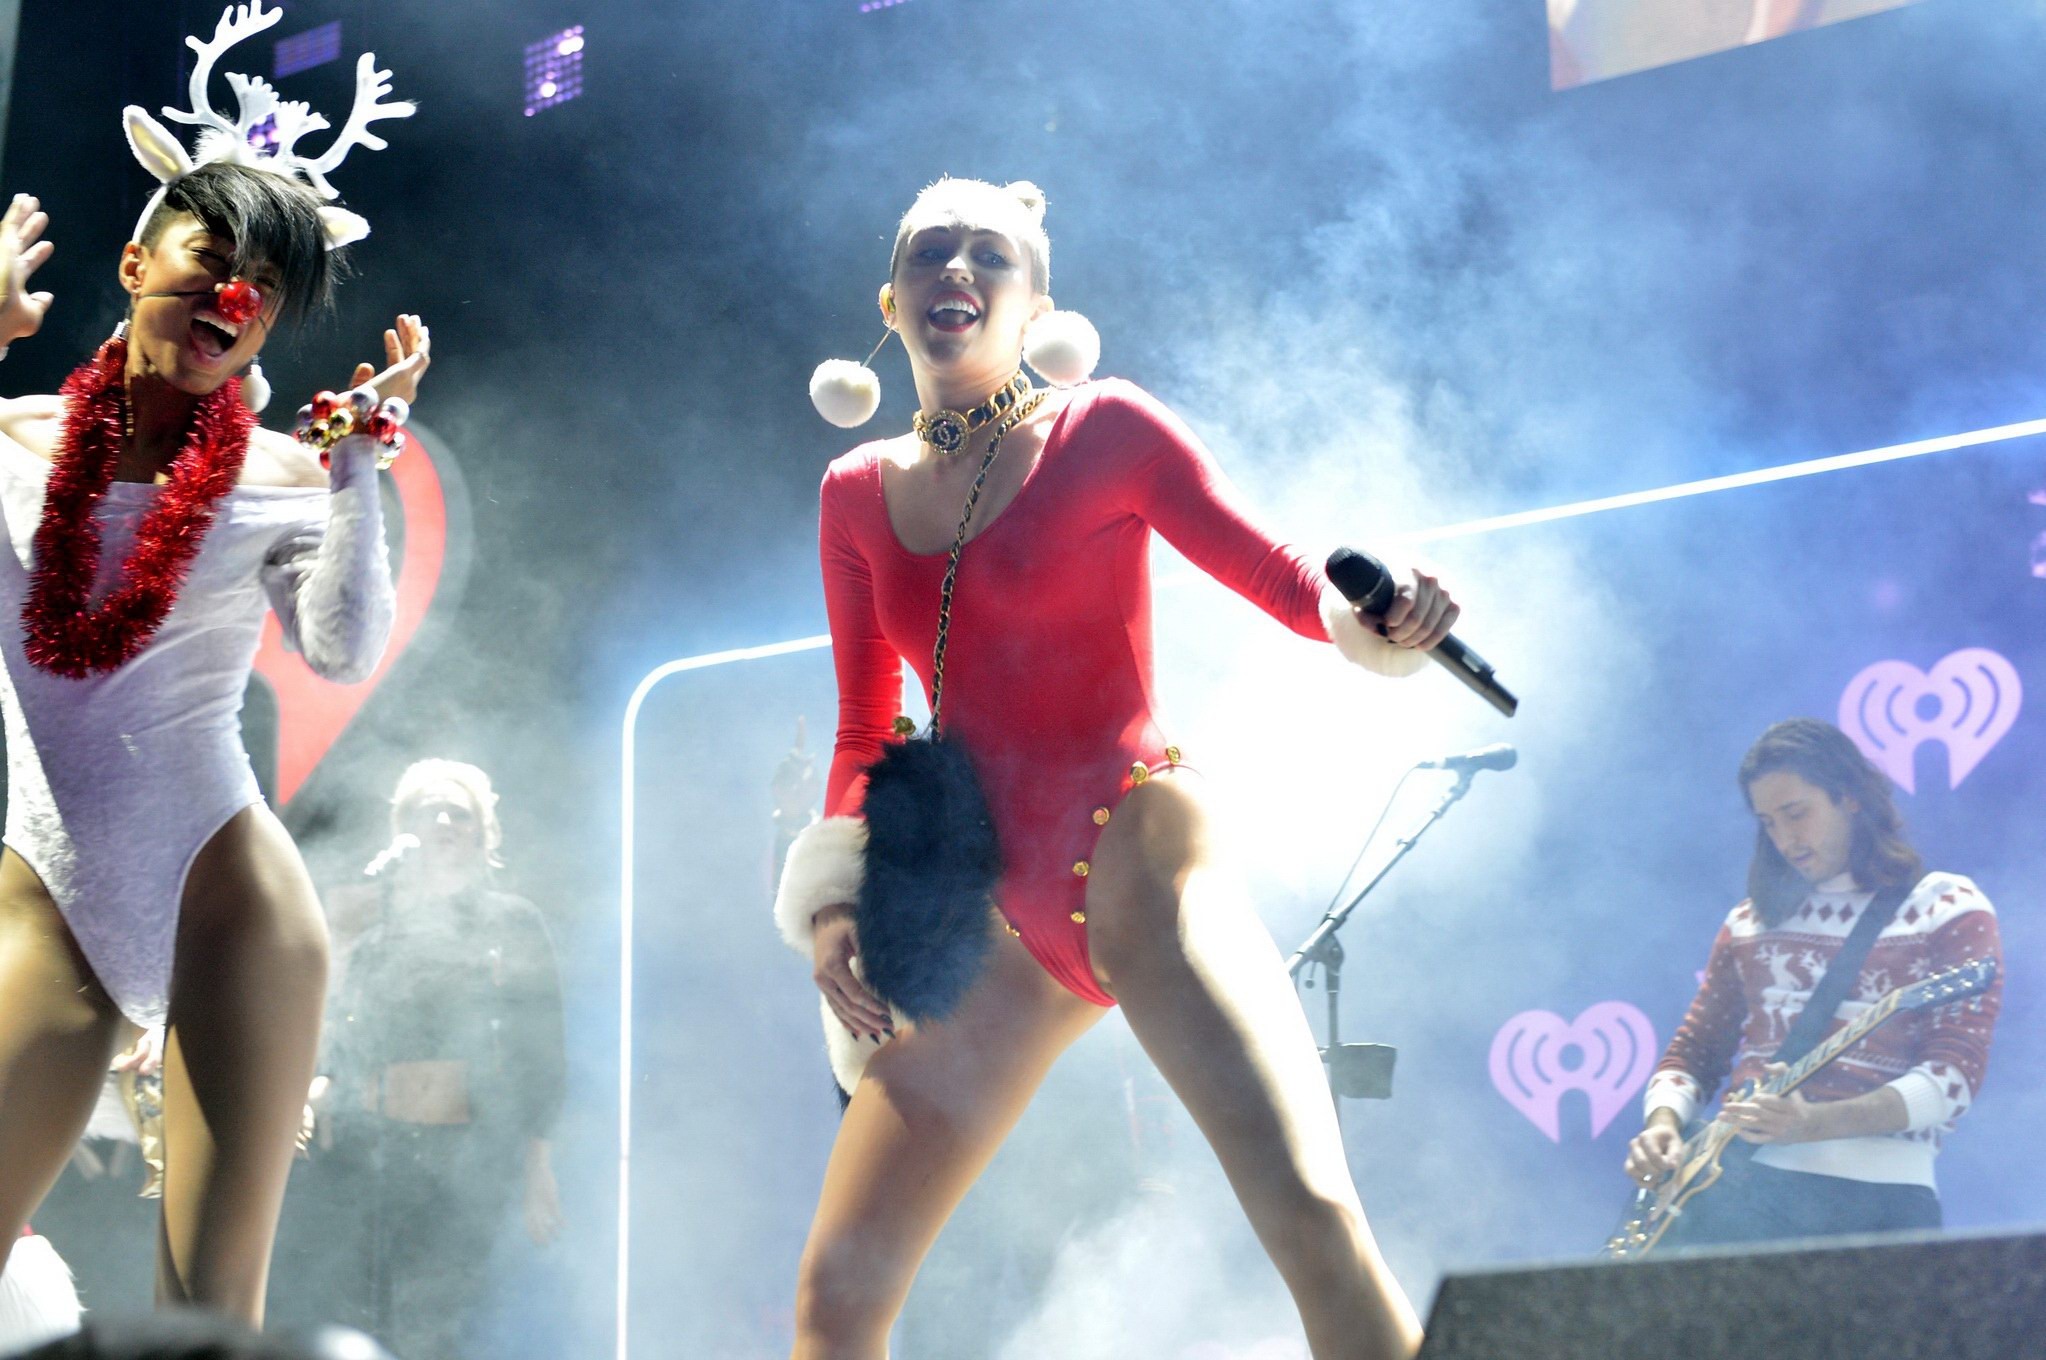 Miley Cyrus shows off pokies and ass wearing a red leotard on stage at 93.3 FLZ' #75209873